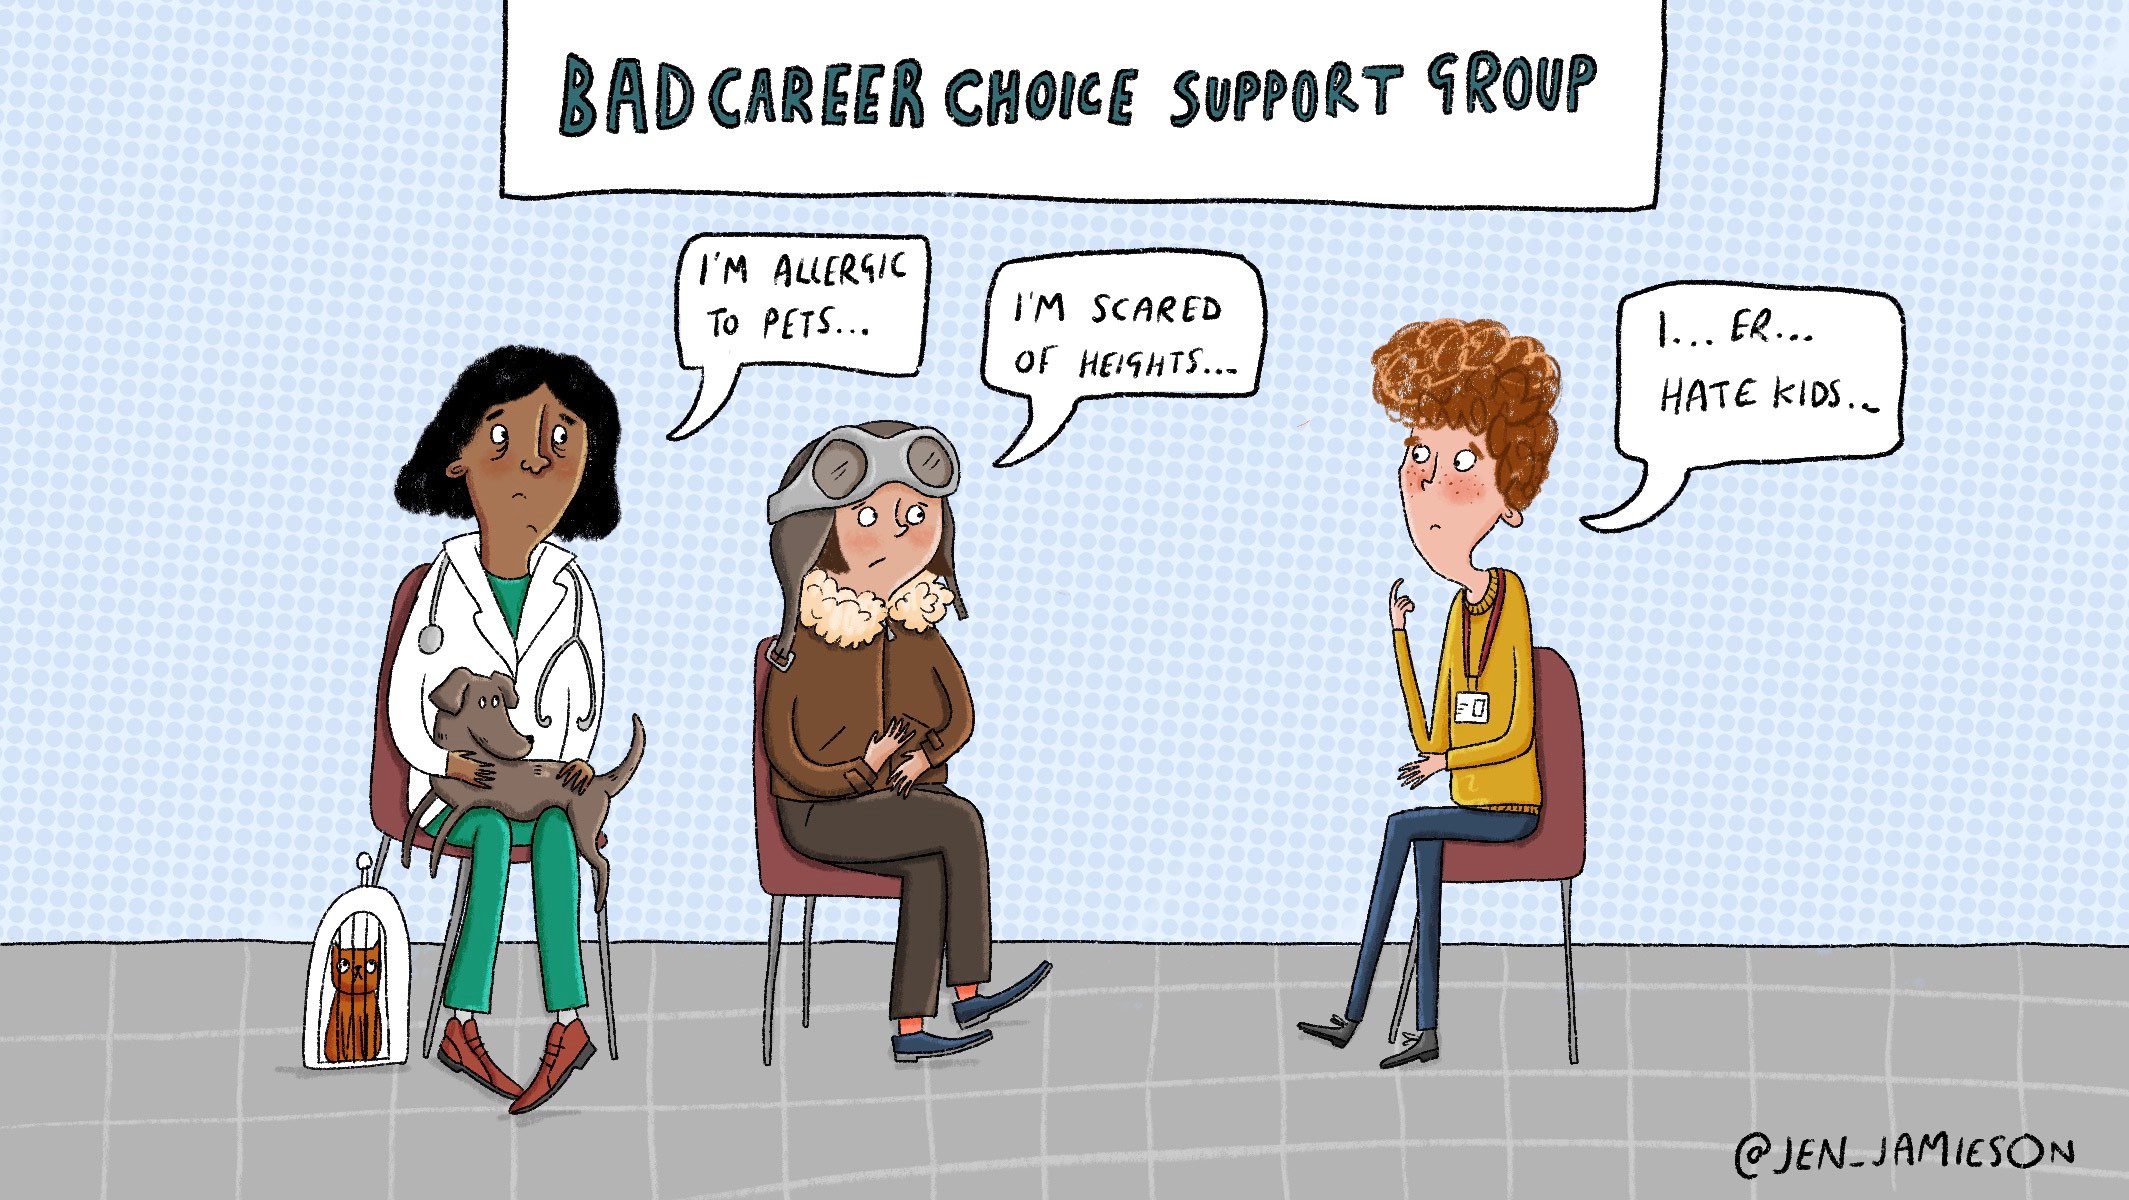 Illustration of Bad Career Choice Support Group